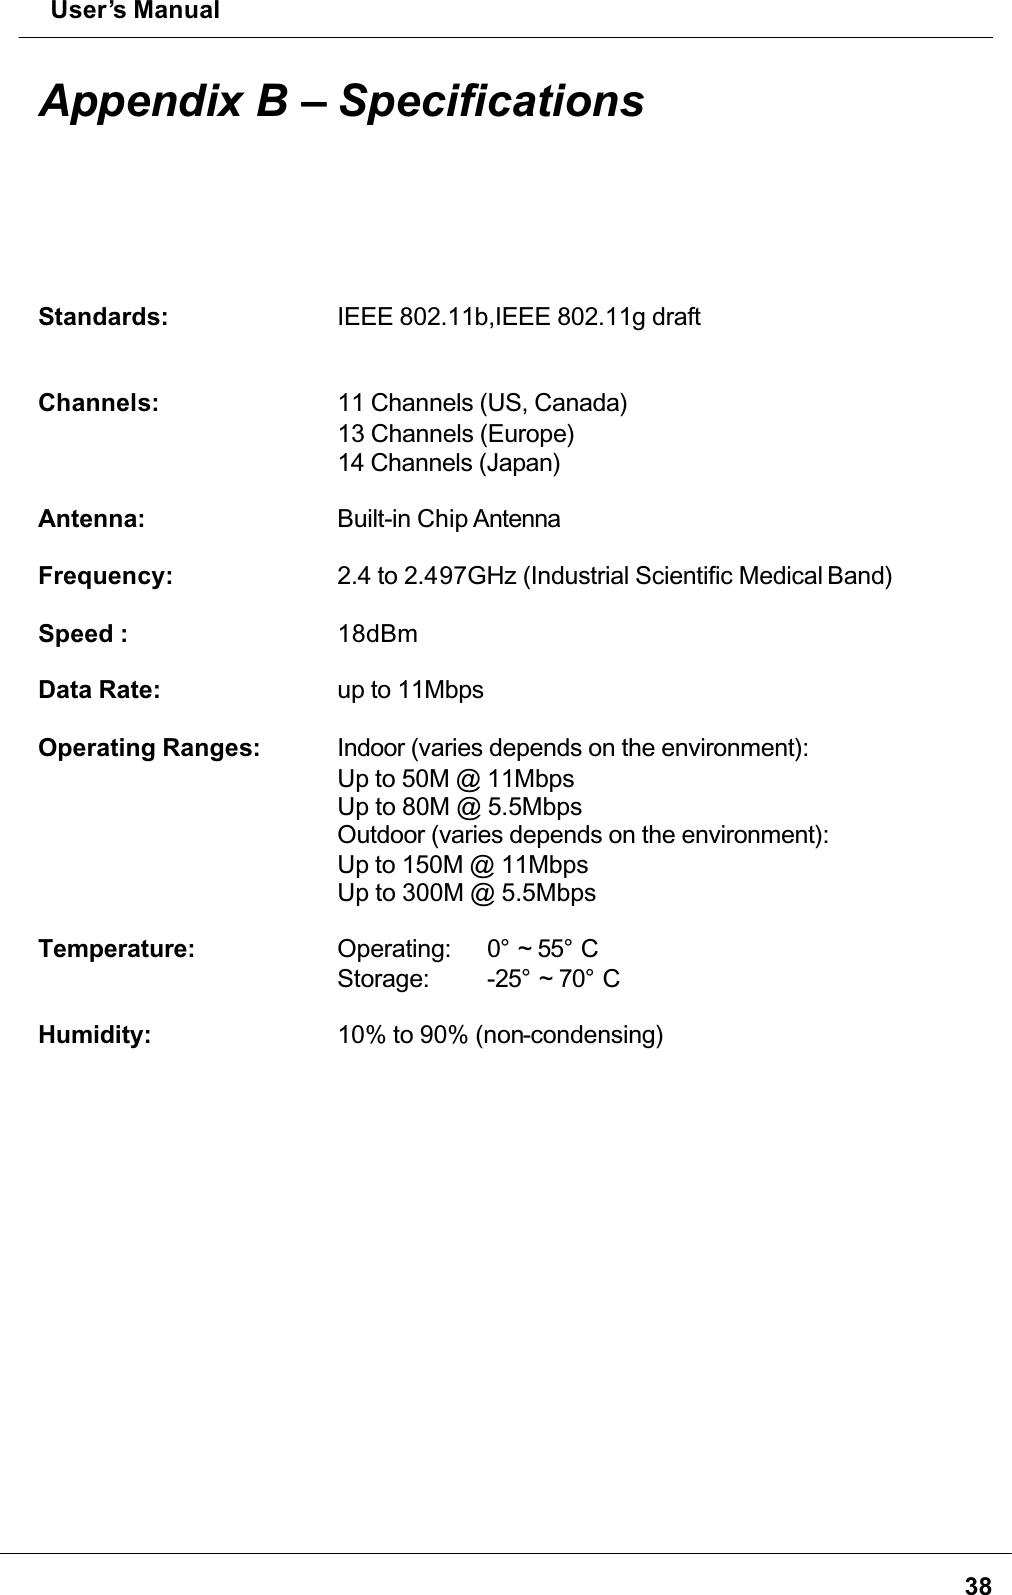  User’s Manual38Appendix B – SpecificationsStandards: IEEE 802.11b,IEEE 802.11g draftChannels: 11 Channels (US, Canada)13 Channels (Europe)14 Channels (Japan)Antenna: Built-in Chip AntennaFrequency: 2.4 to 2.497GHz (Industrial Scientific Medical Band)Speed : 18dBmData Rate: up to 11MbpsOperating Ranges: Indoor (varies depends on the environment):Up to 50M @ 11MbpsUp to 80M @ 5.5MbpsOutdoor (varies depends on the environment):Up to 150M @ 11MbpsUp to 300M @ 5.5MbpsTemperature: Operating: 0° ~ 55° CStorage: -25° ~ 70° CHumidity: 10% to 90% (non-condensing)